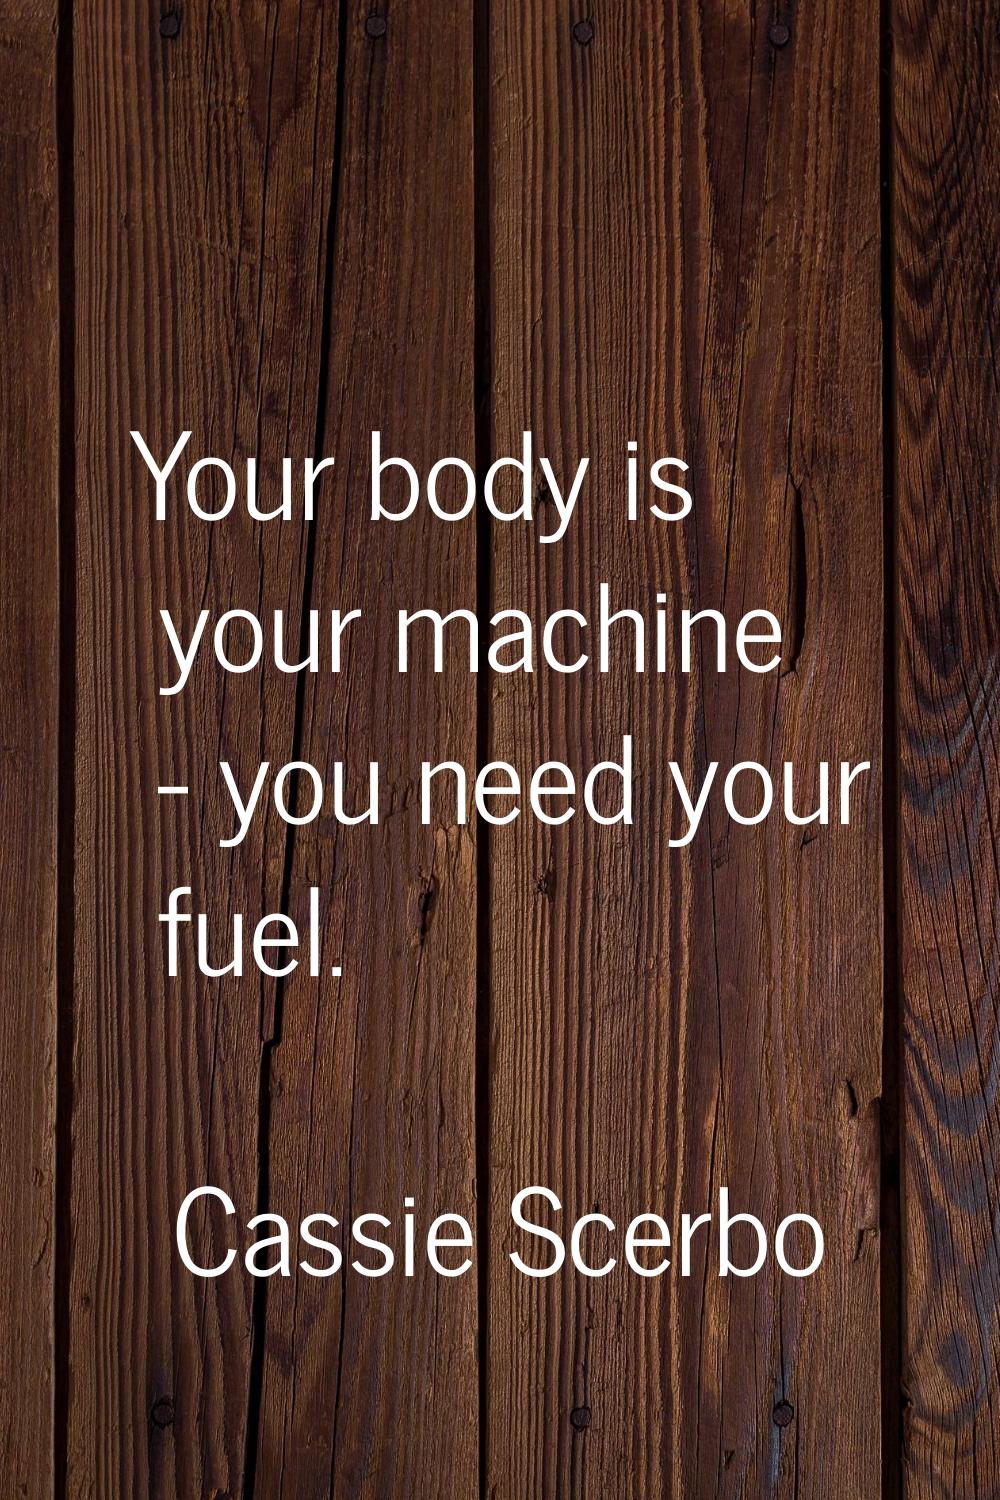 Your body is your machine - you need your fuel.